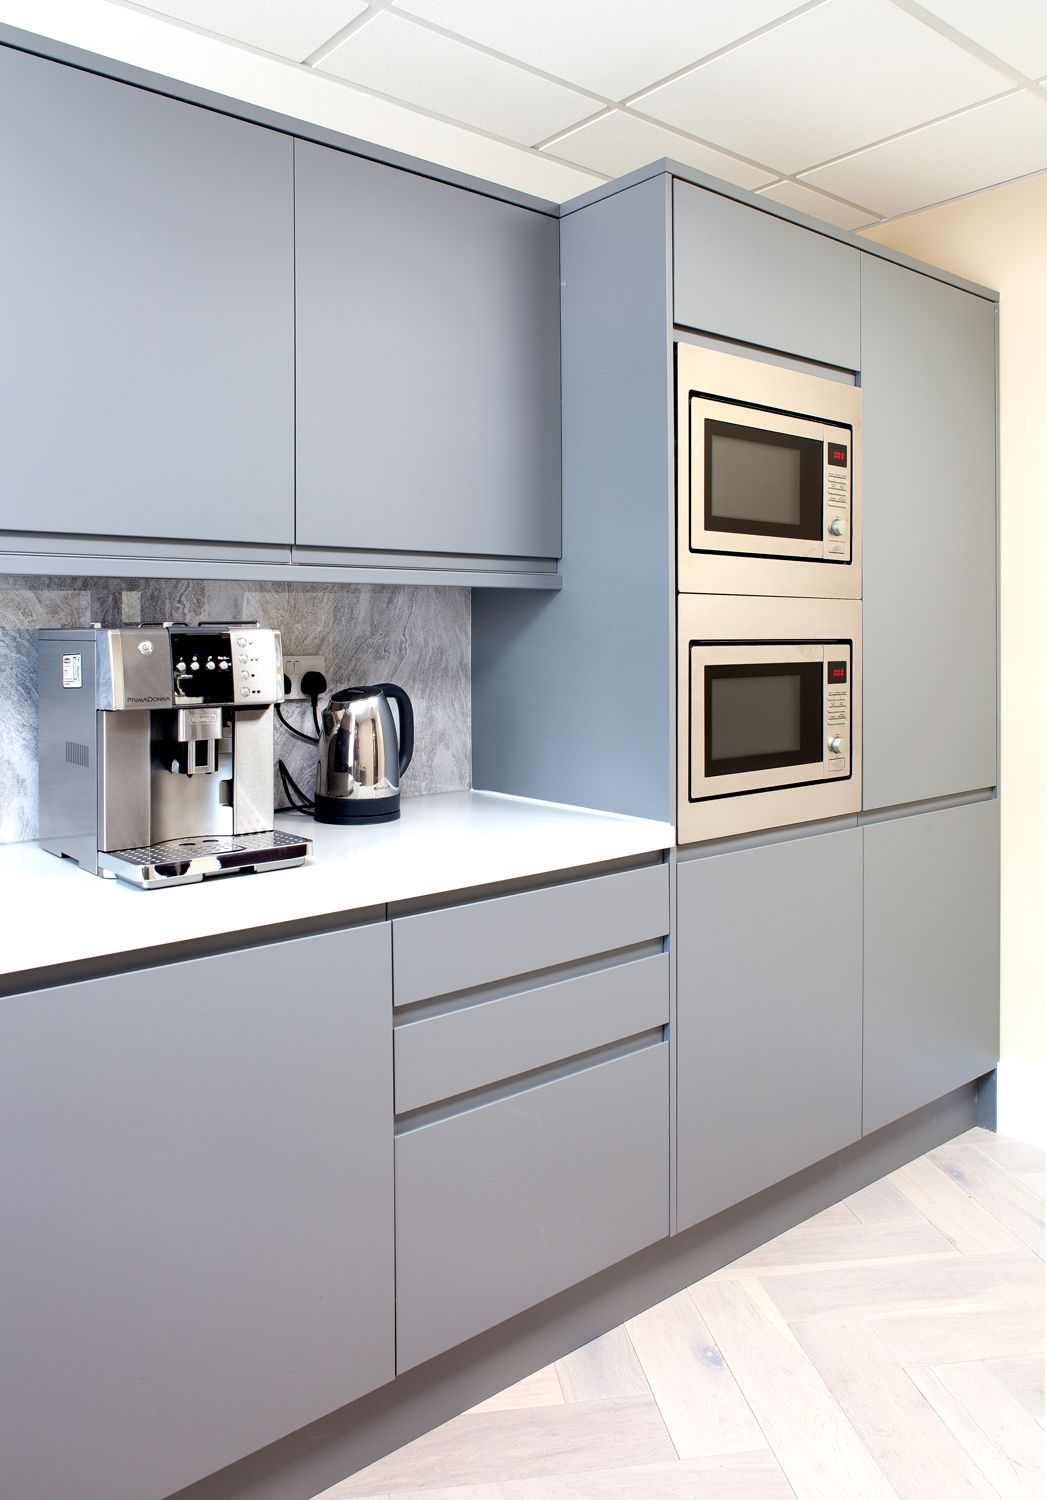 A kitchen space with grey cabinets, two microwaves and a coffee machine.